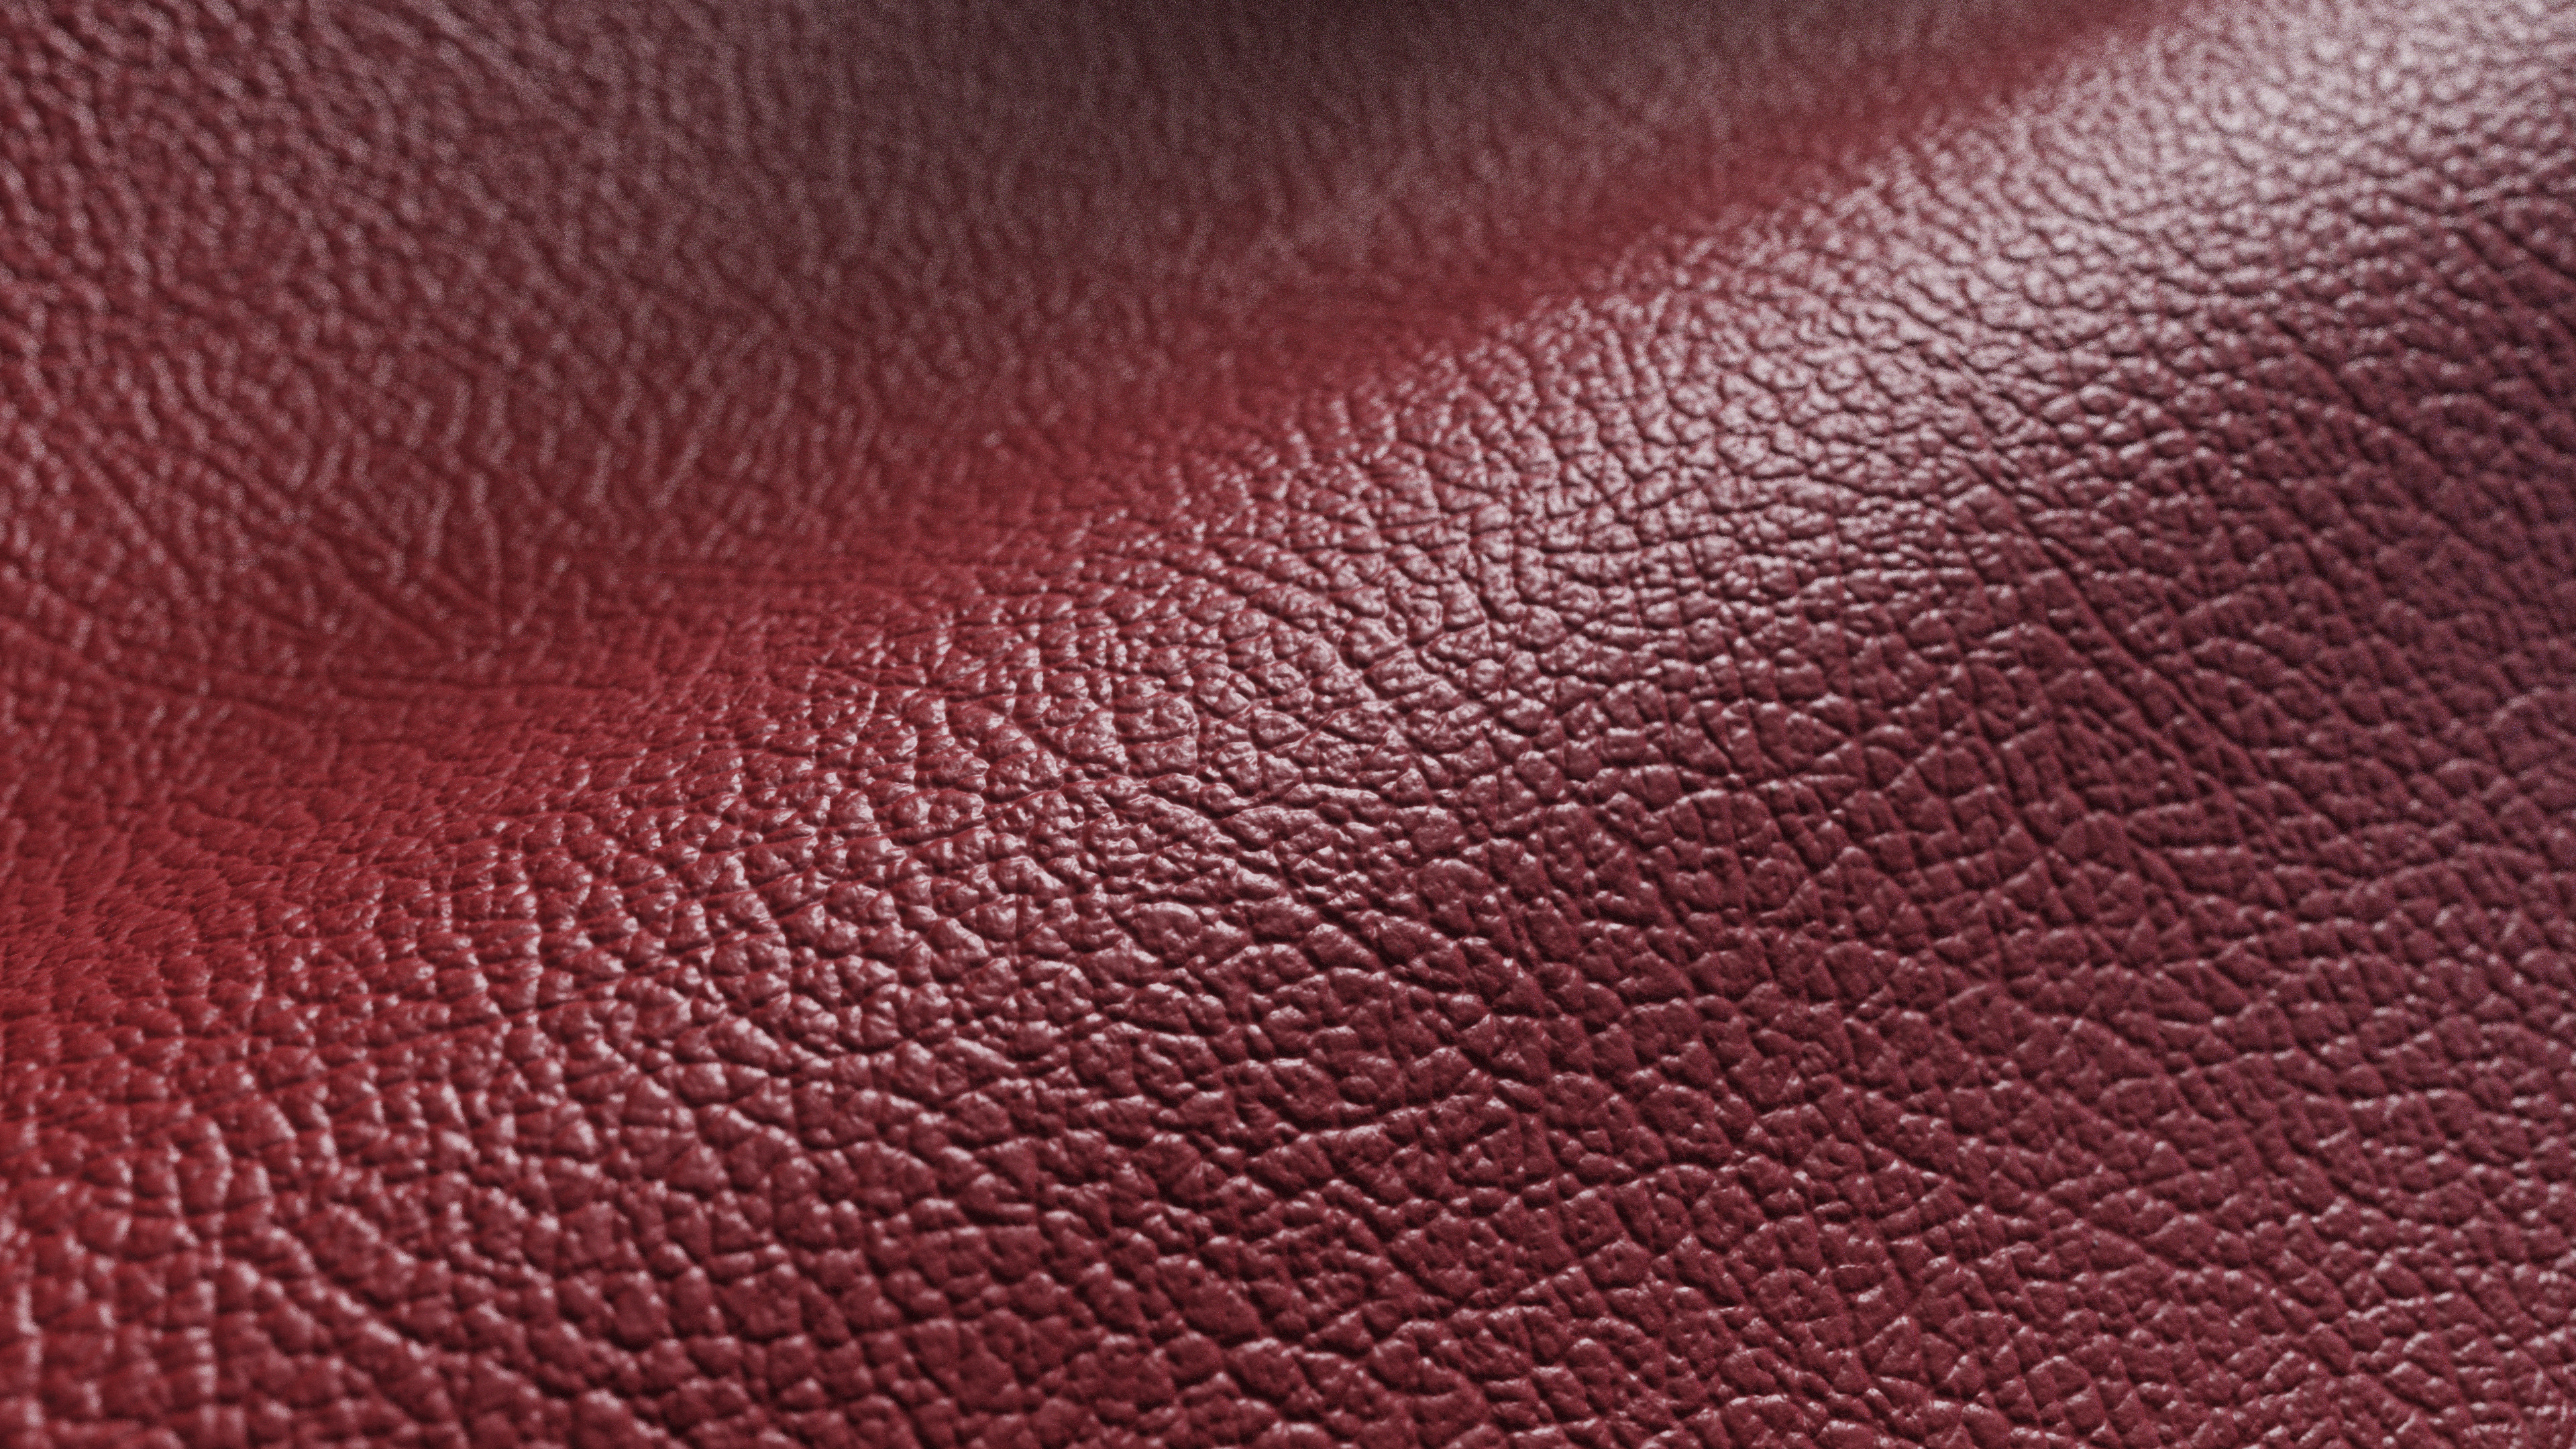 3d Scanned Leather Material 0 12x0 12 Meters